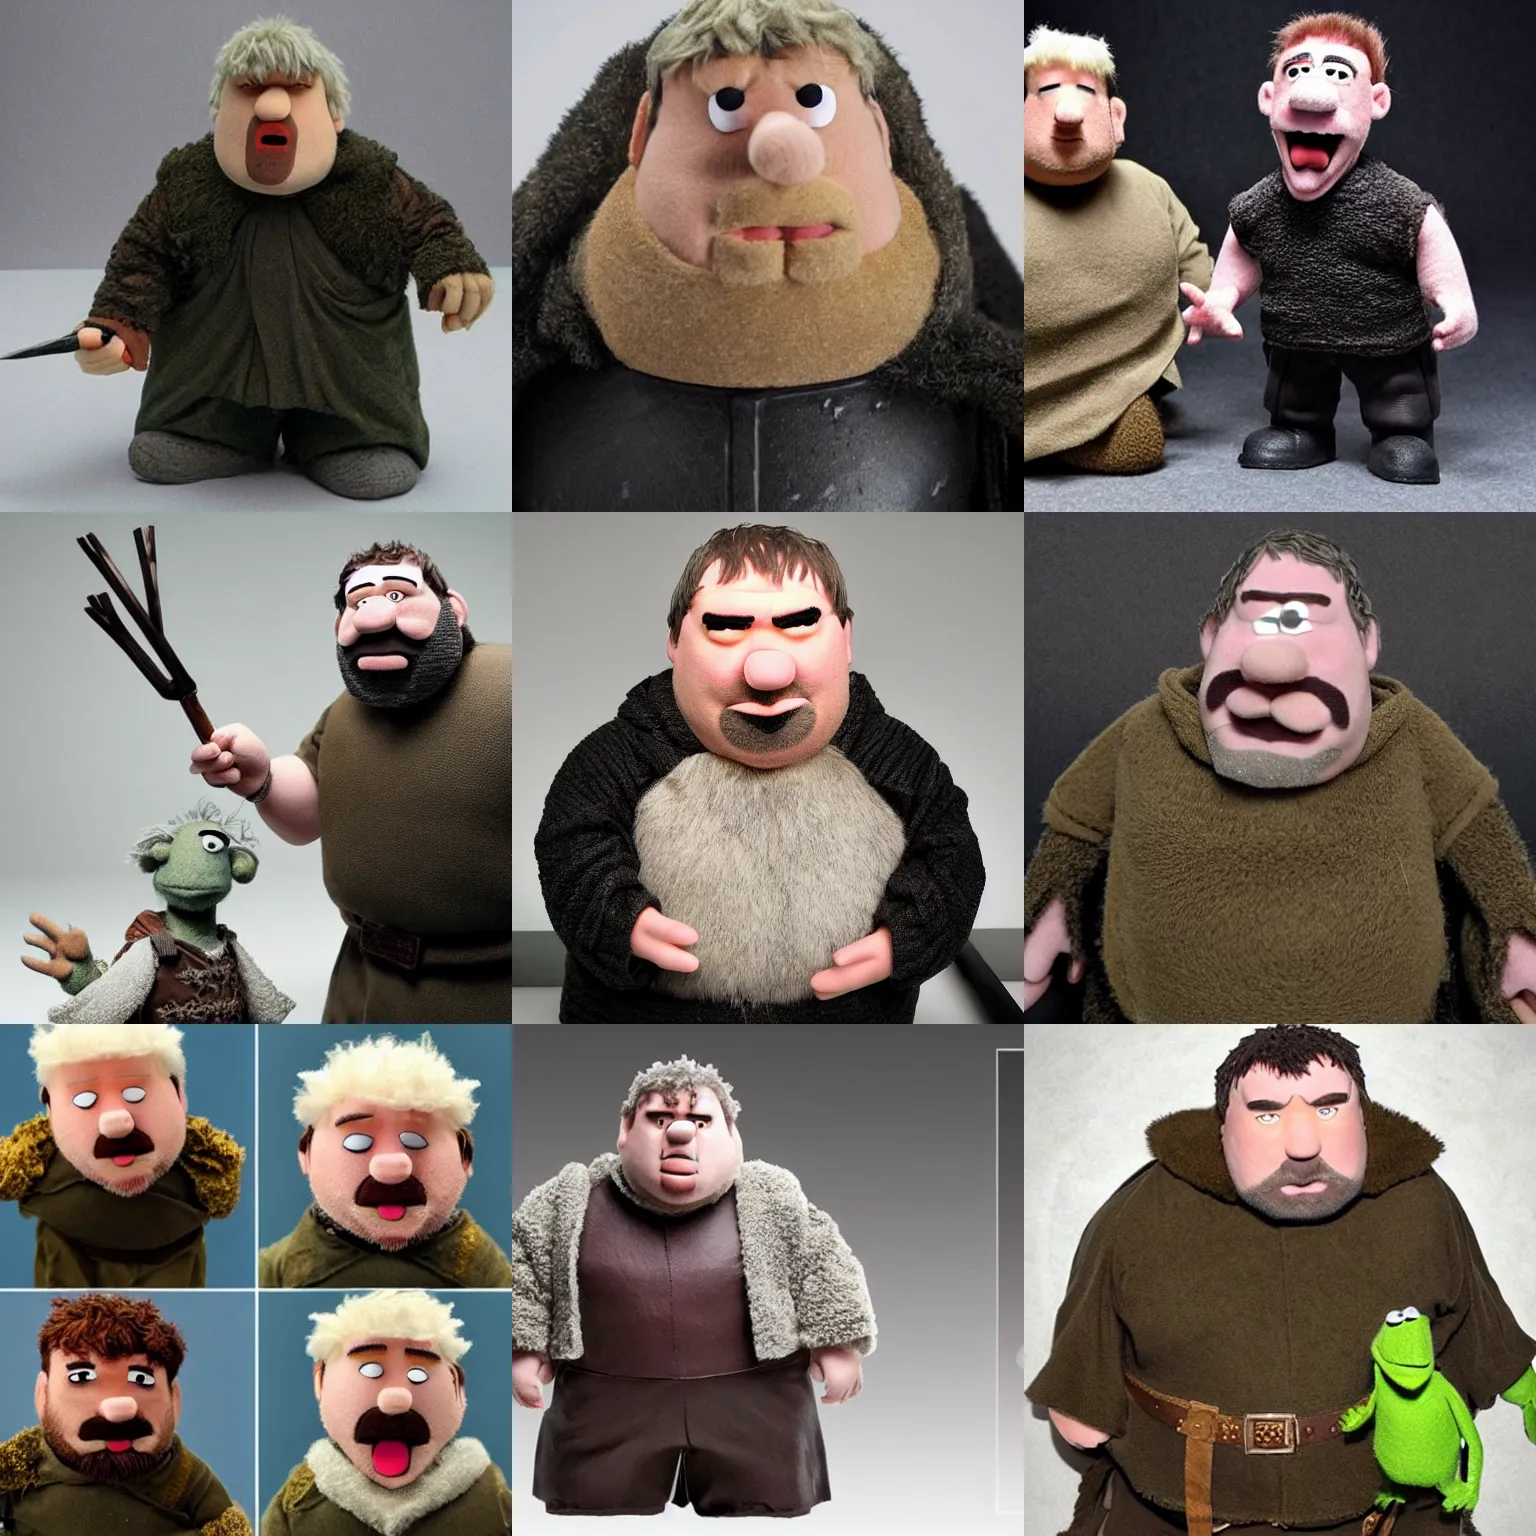 Prompt: hodor from game of thrones as a realistic muppet